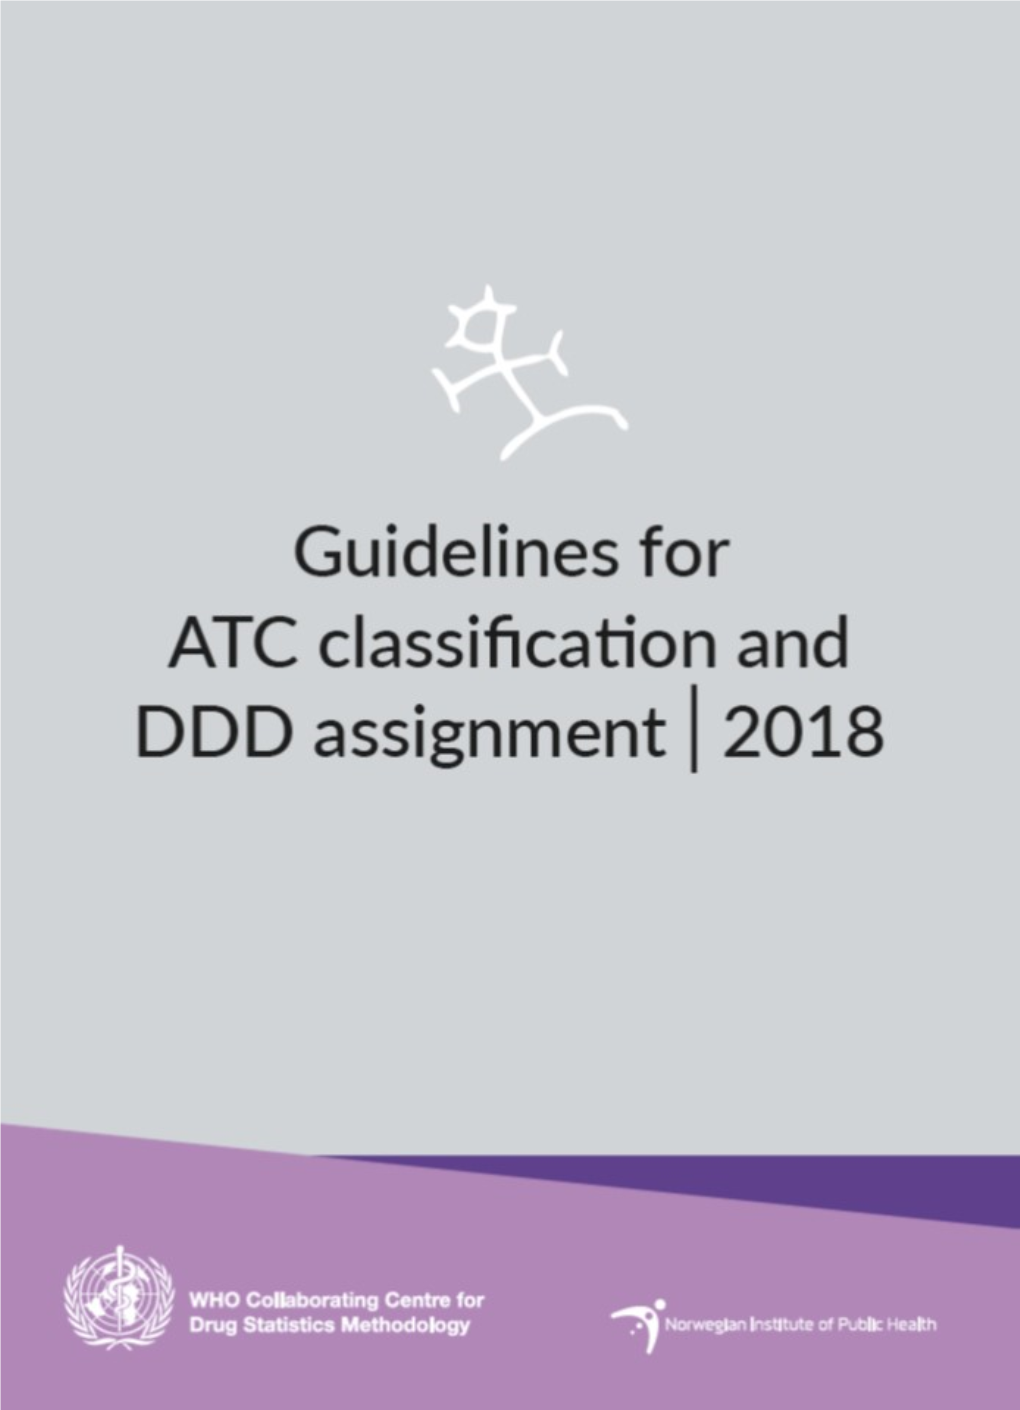 PDF (Guidelines for ATC Classification and DDD Assignment)